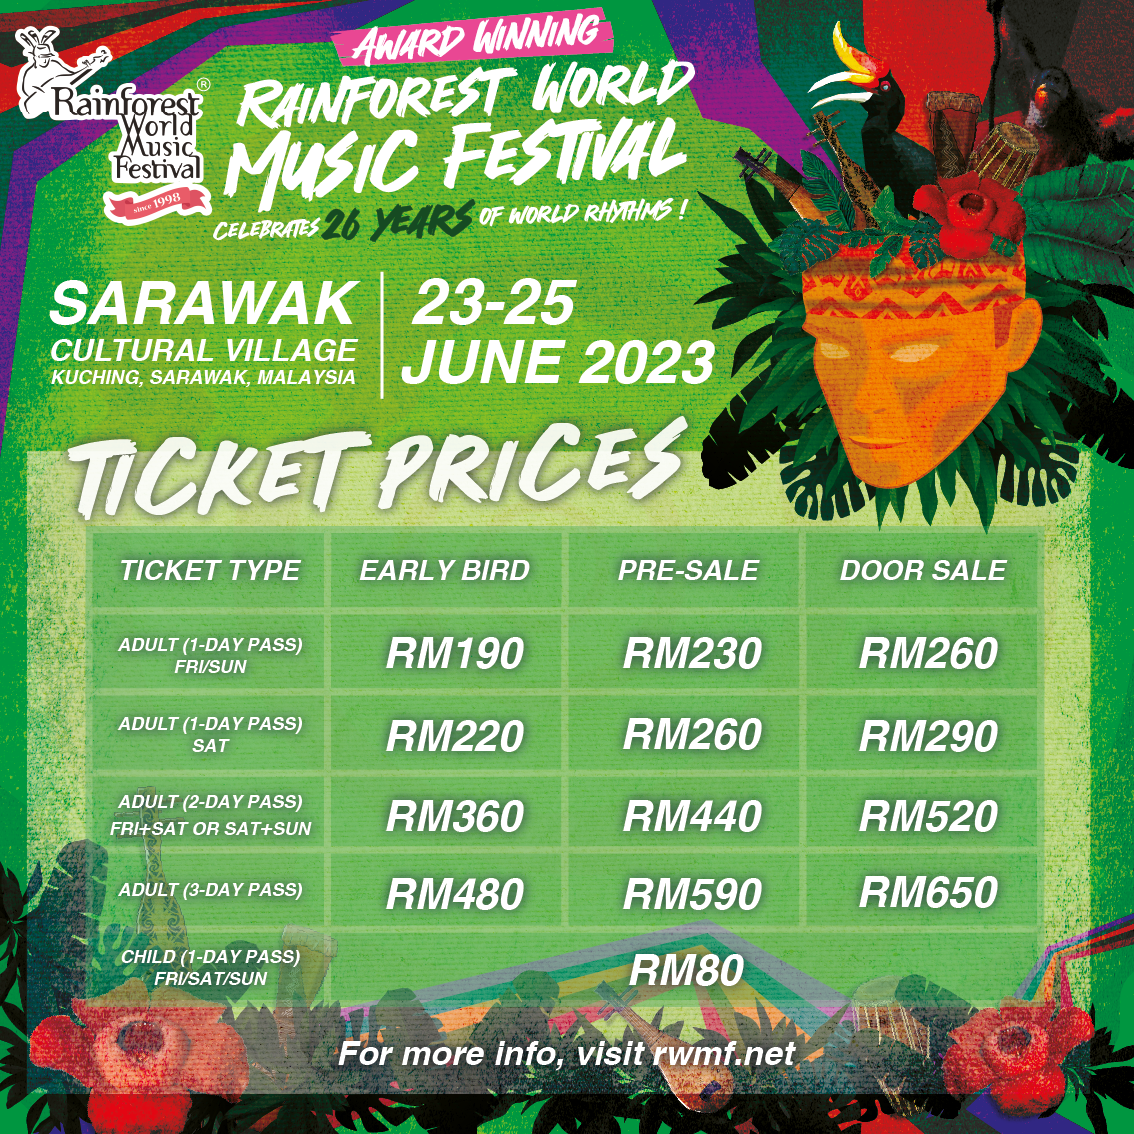 EARLY BIRD TICKETS SALE TO WORLD RENOWNED RAINFOREST WORLD MUSIC FESTIVAL STARTS MIDNIGHT 15 APRIL 2023